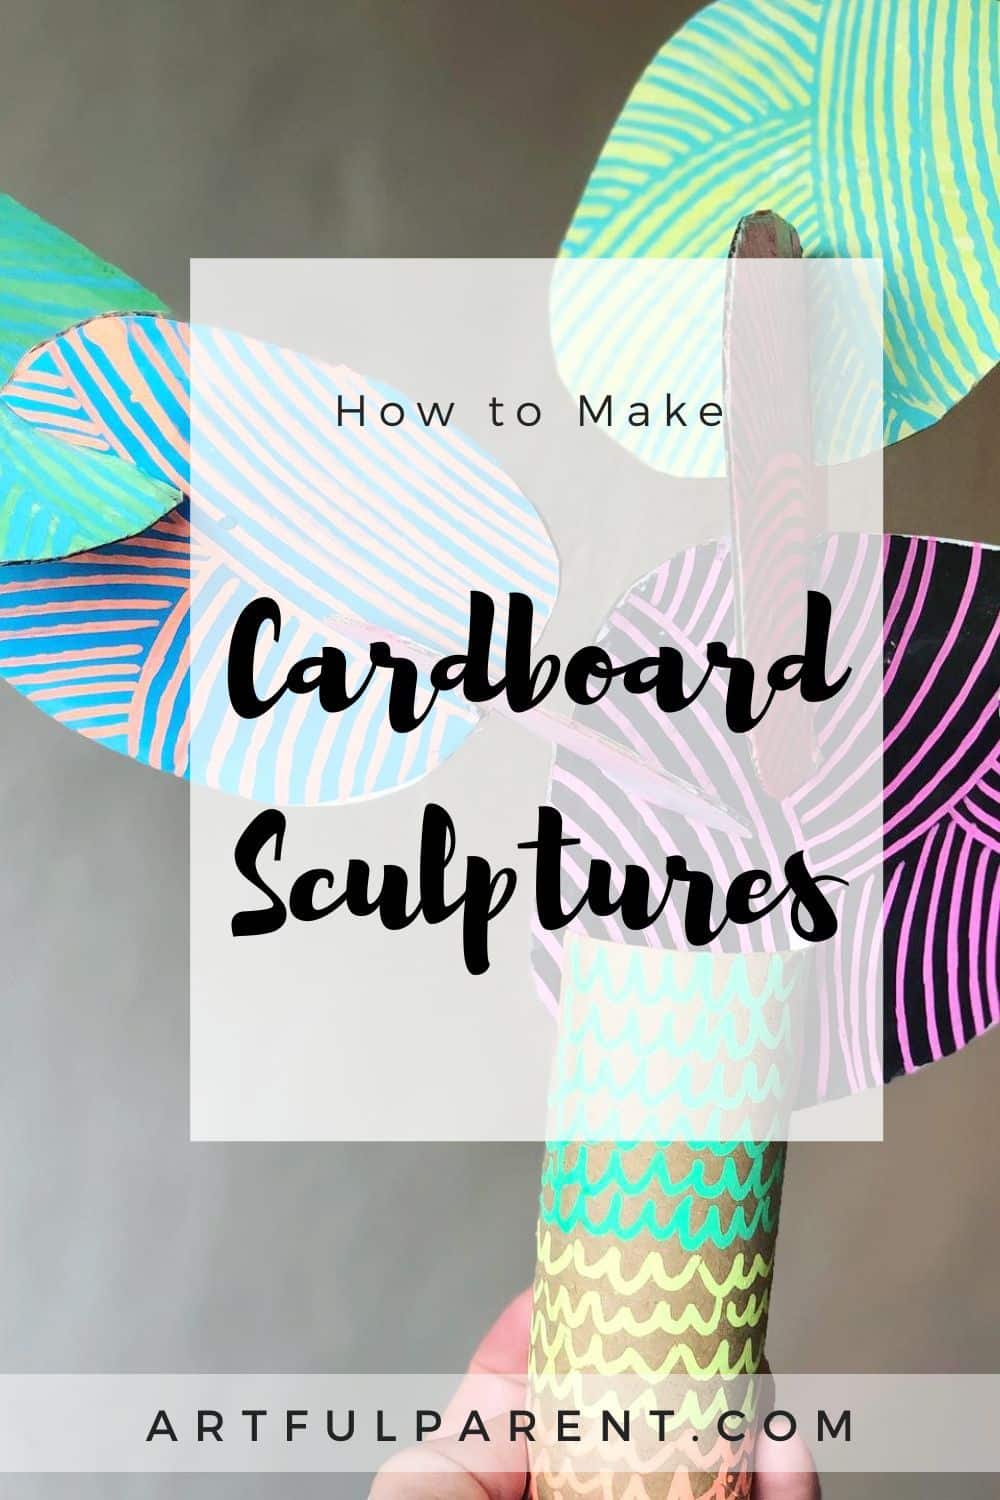 How to Make Colorful Cardboard Sculptures